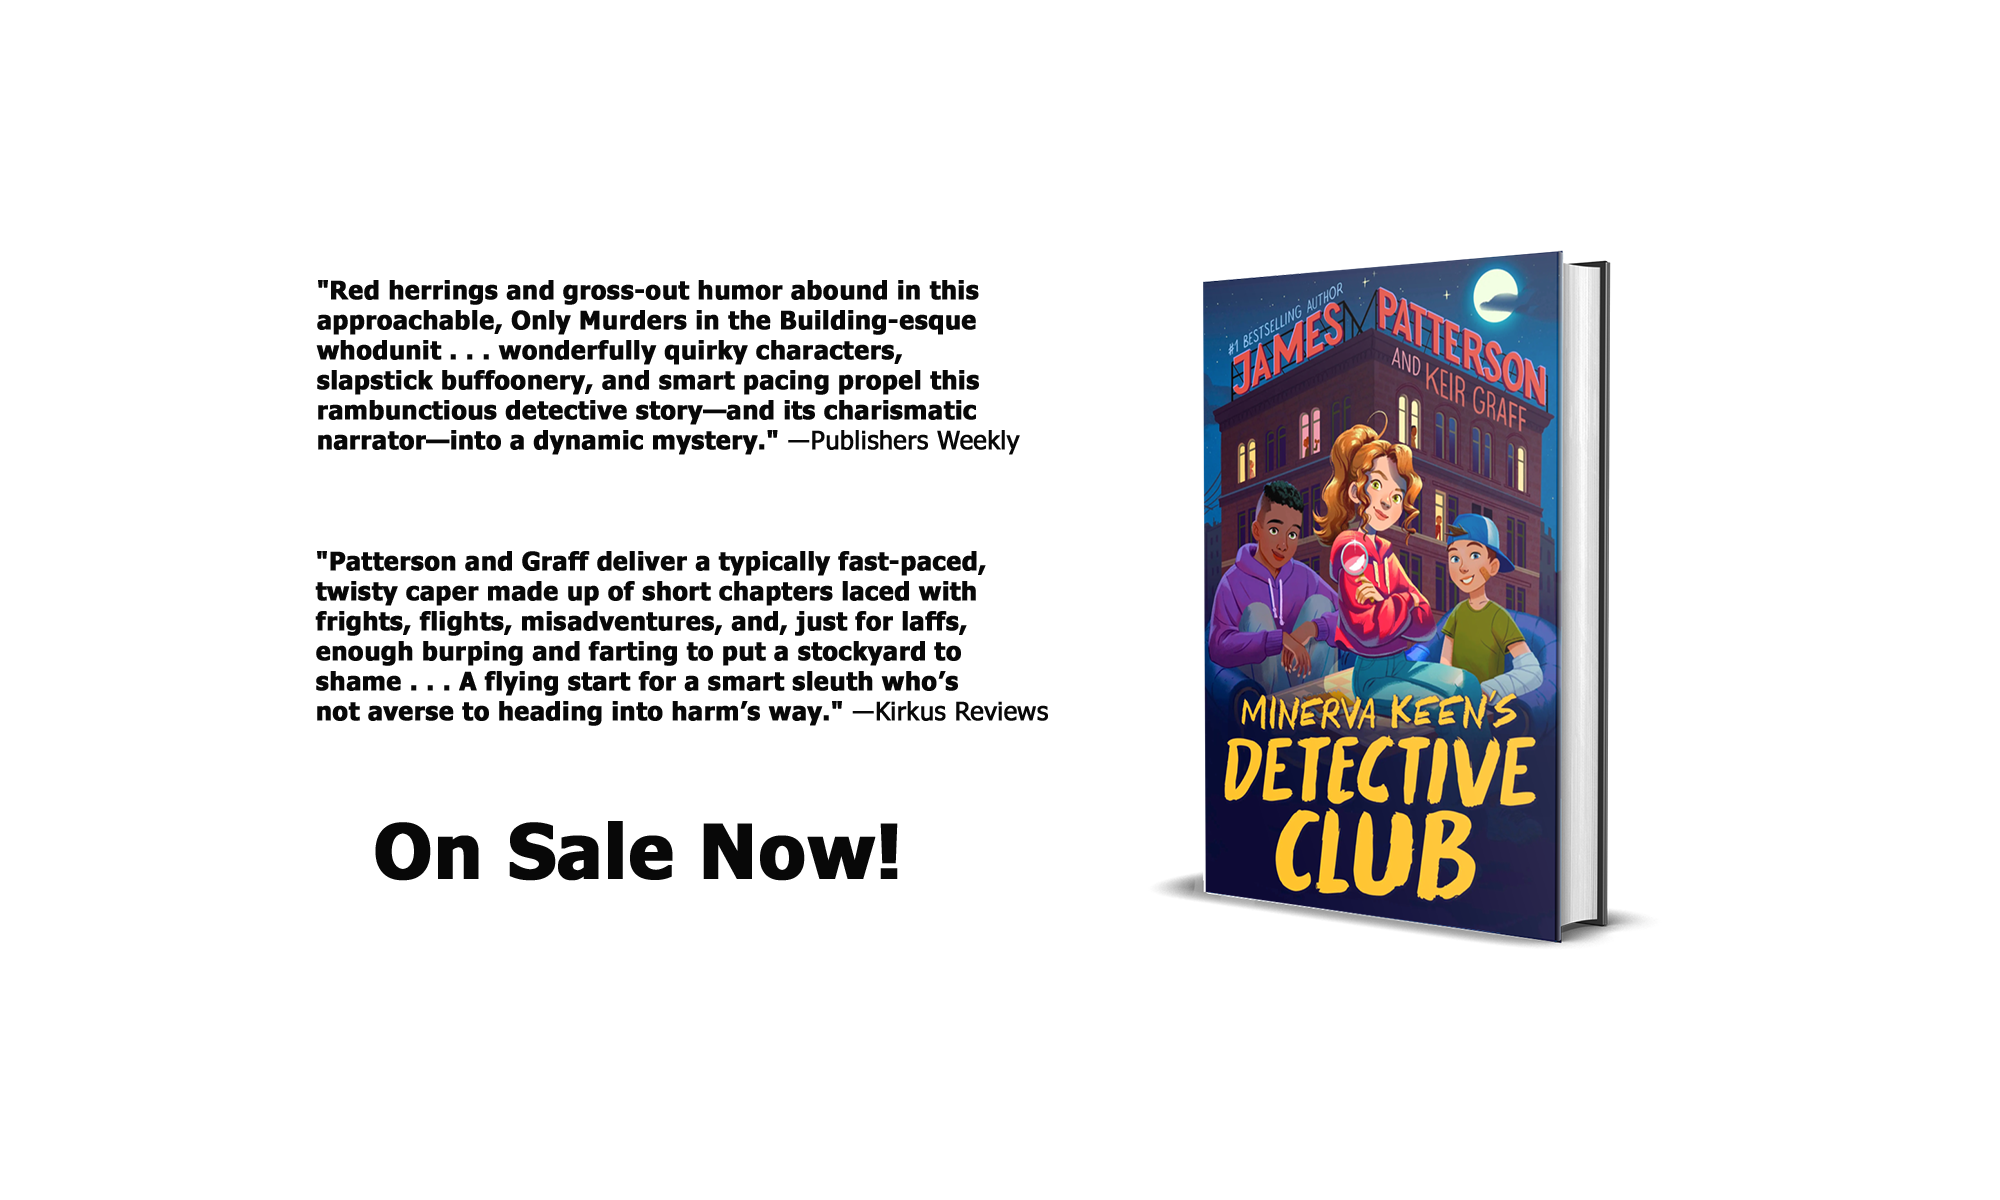 Minerva Keen's Detective Club by James Patterson, Keir Graff, Hardcover